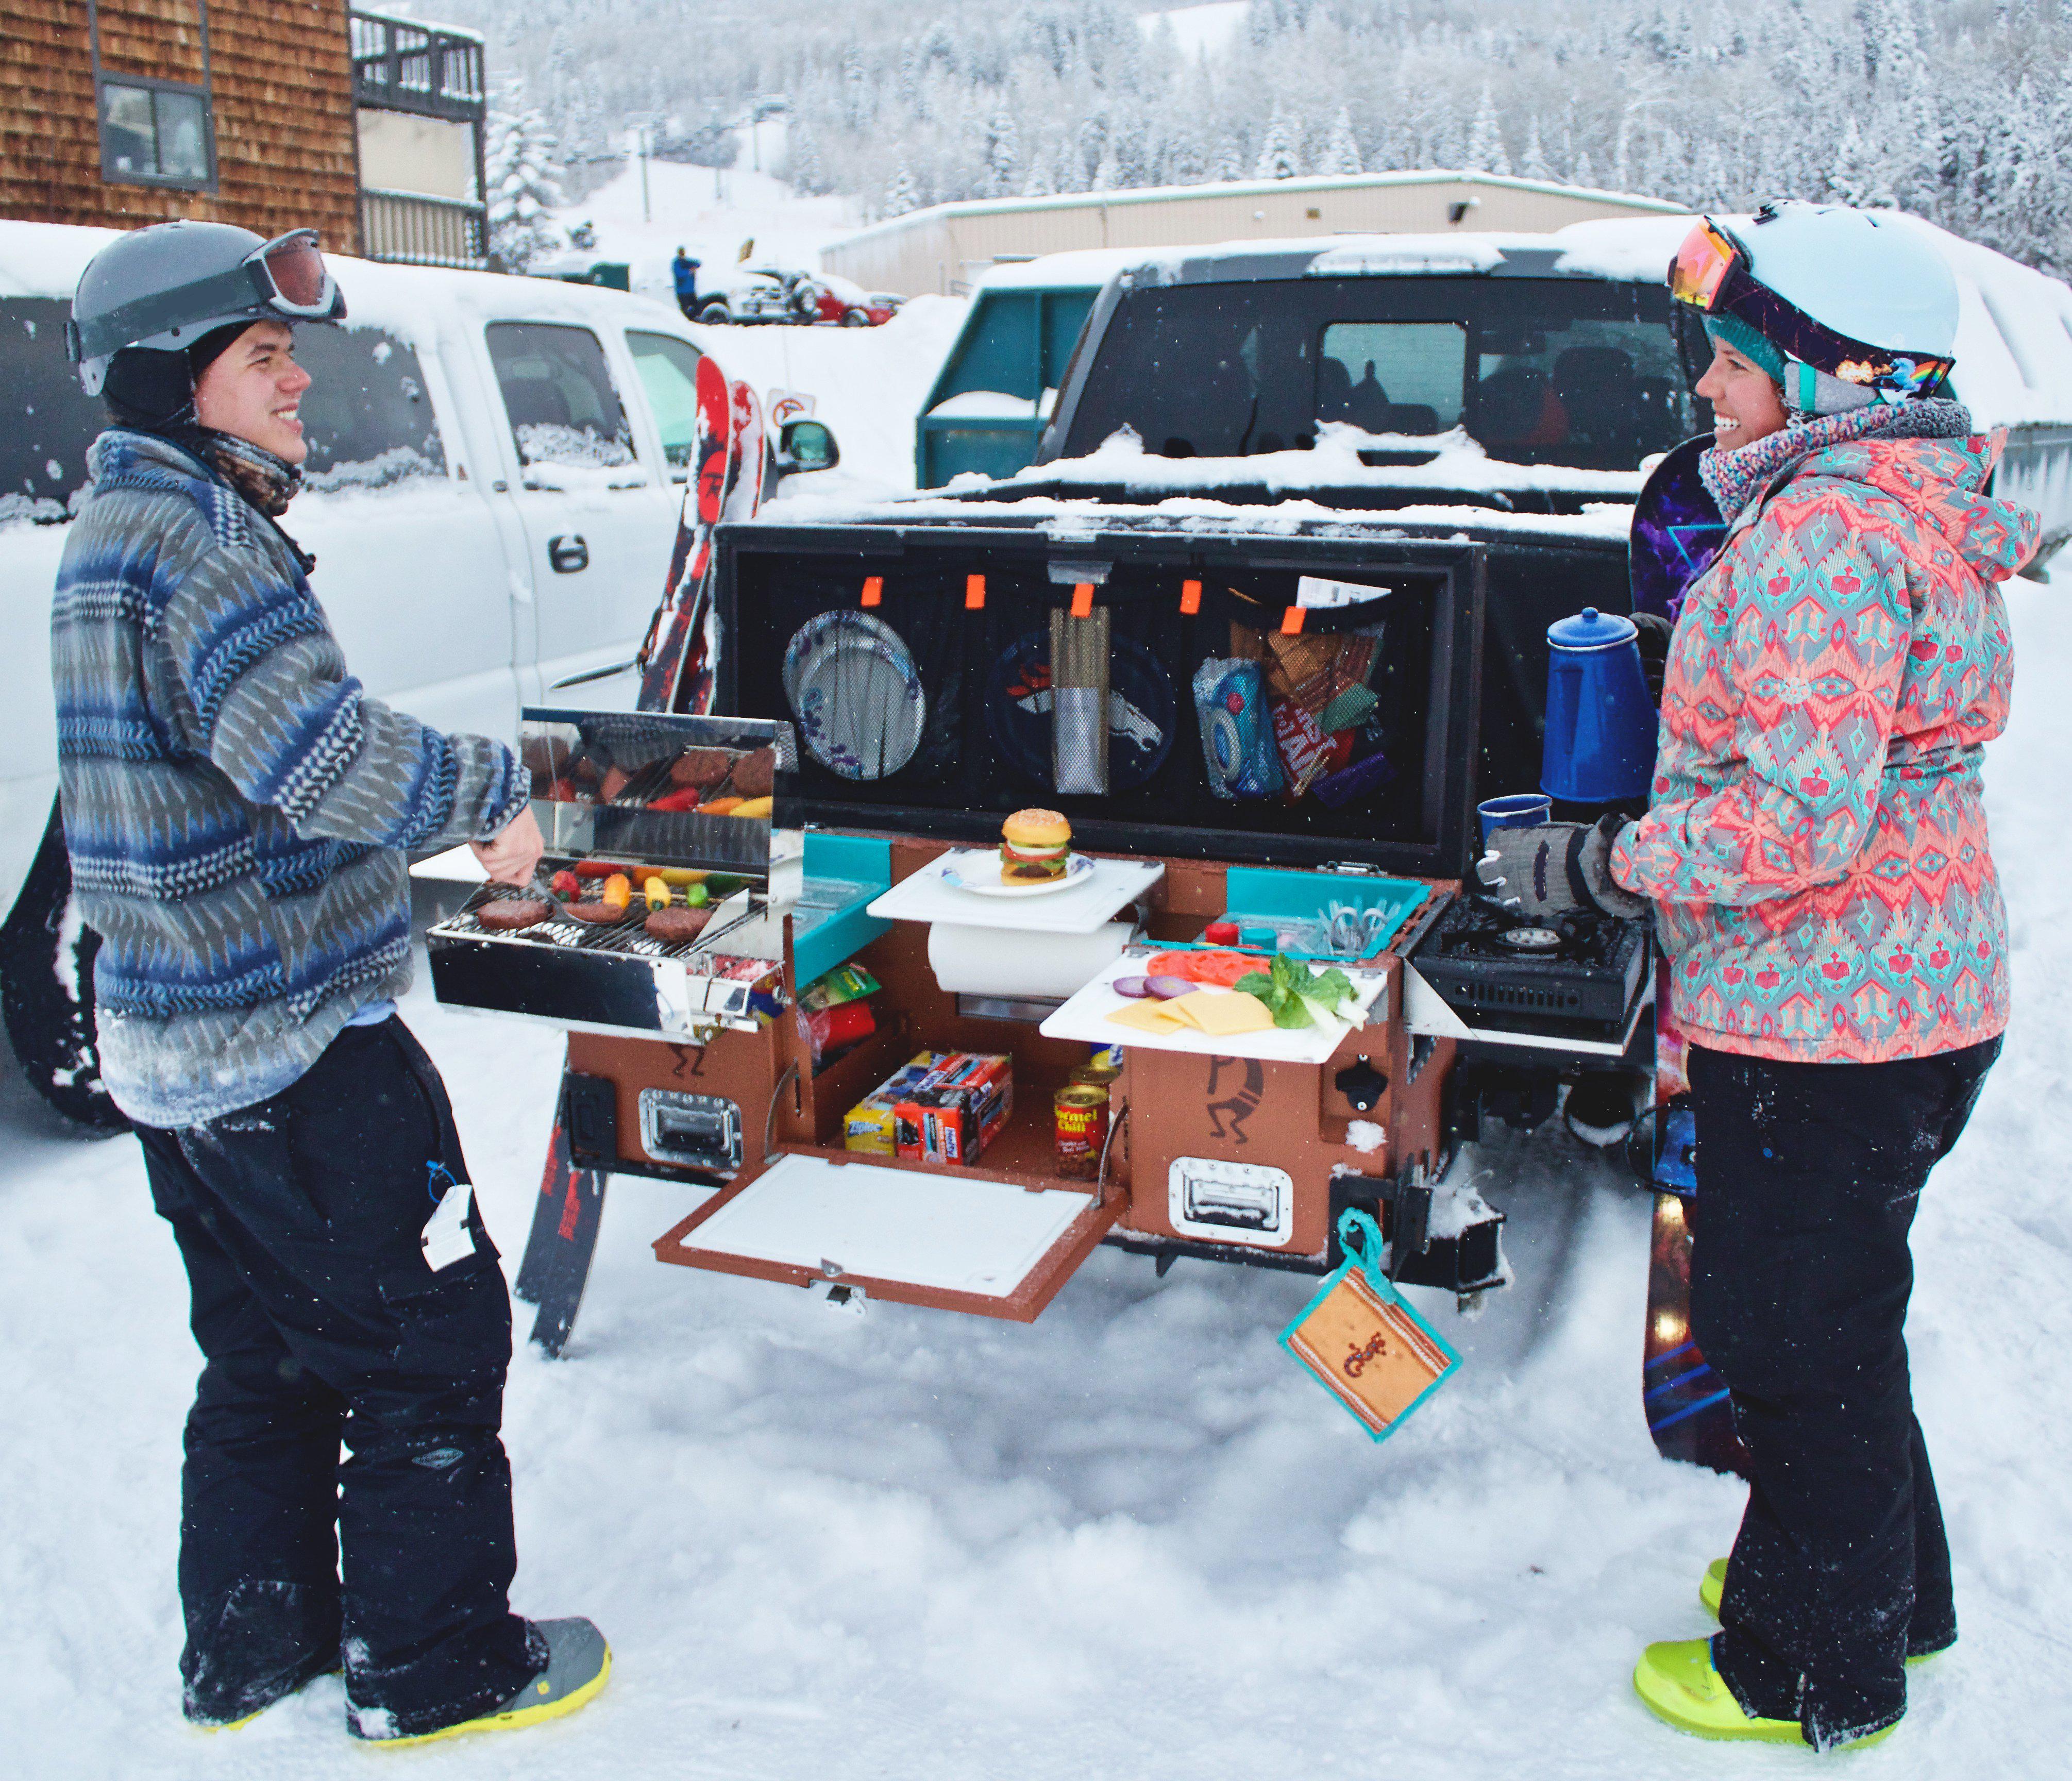 Tailgate N Go fully kitted and being used in the snow by skiers.